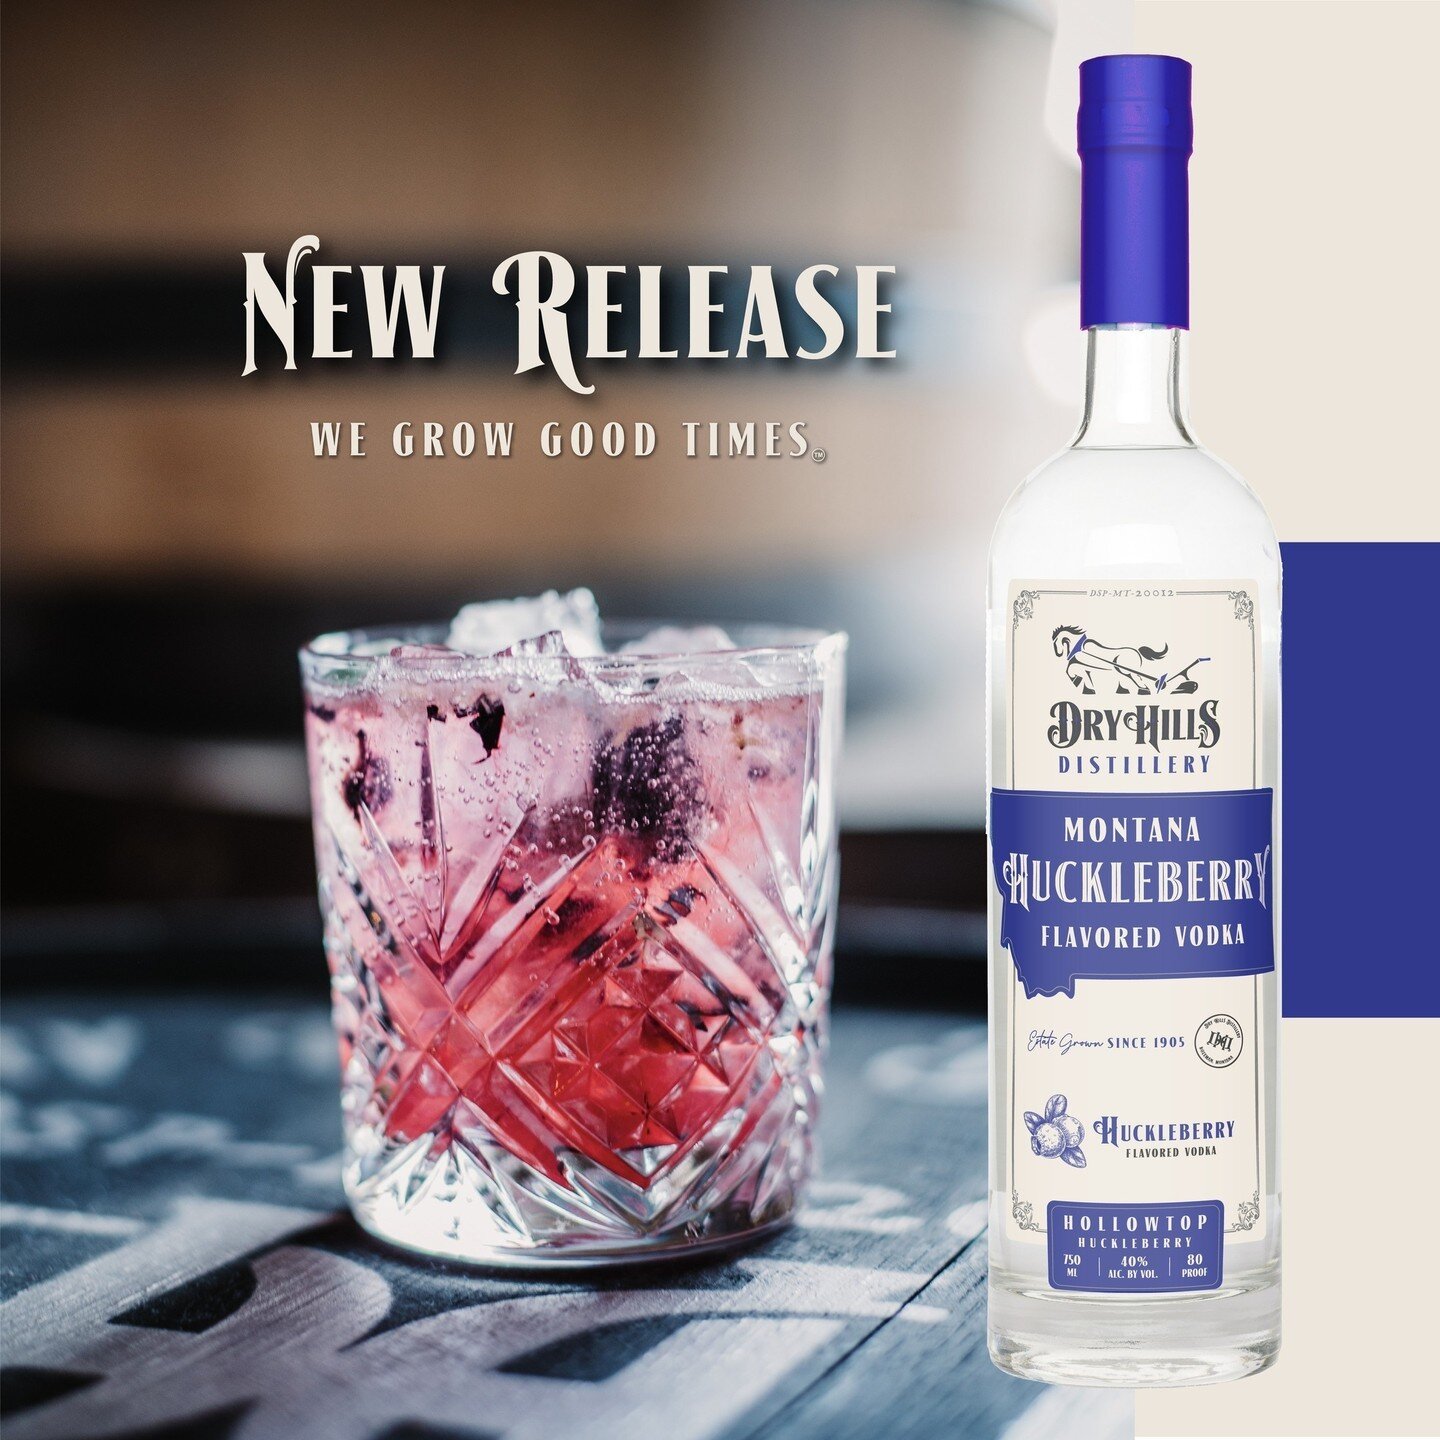 Dry Hills Distillery |  Label Design⁠
Montana Huckleberry Hollowtop Vodka was officially released over the weekend!⁠
⁠
If you're looking for a true Montana grown and distilled huckleberry vodka, then look no further. Montana Hollowtop Huckleberry Vod